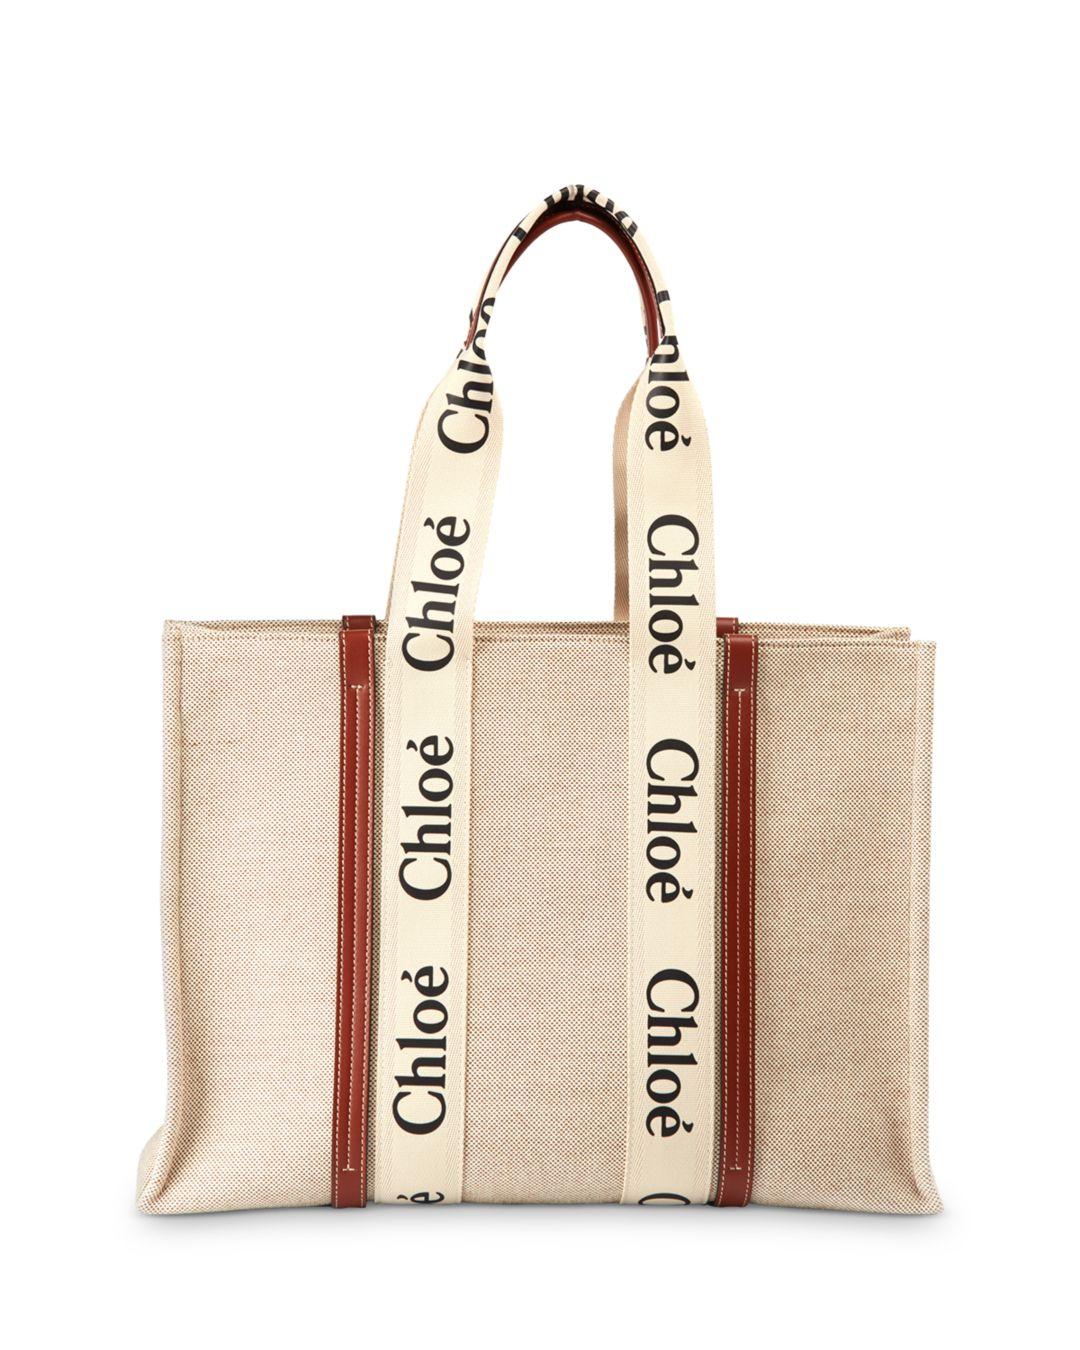 Chloé Cotton Woody Large Tote Bag in White/Brown (Brown) - Lyst